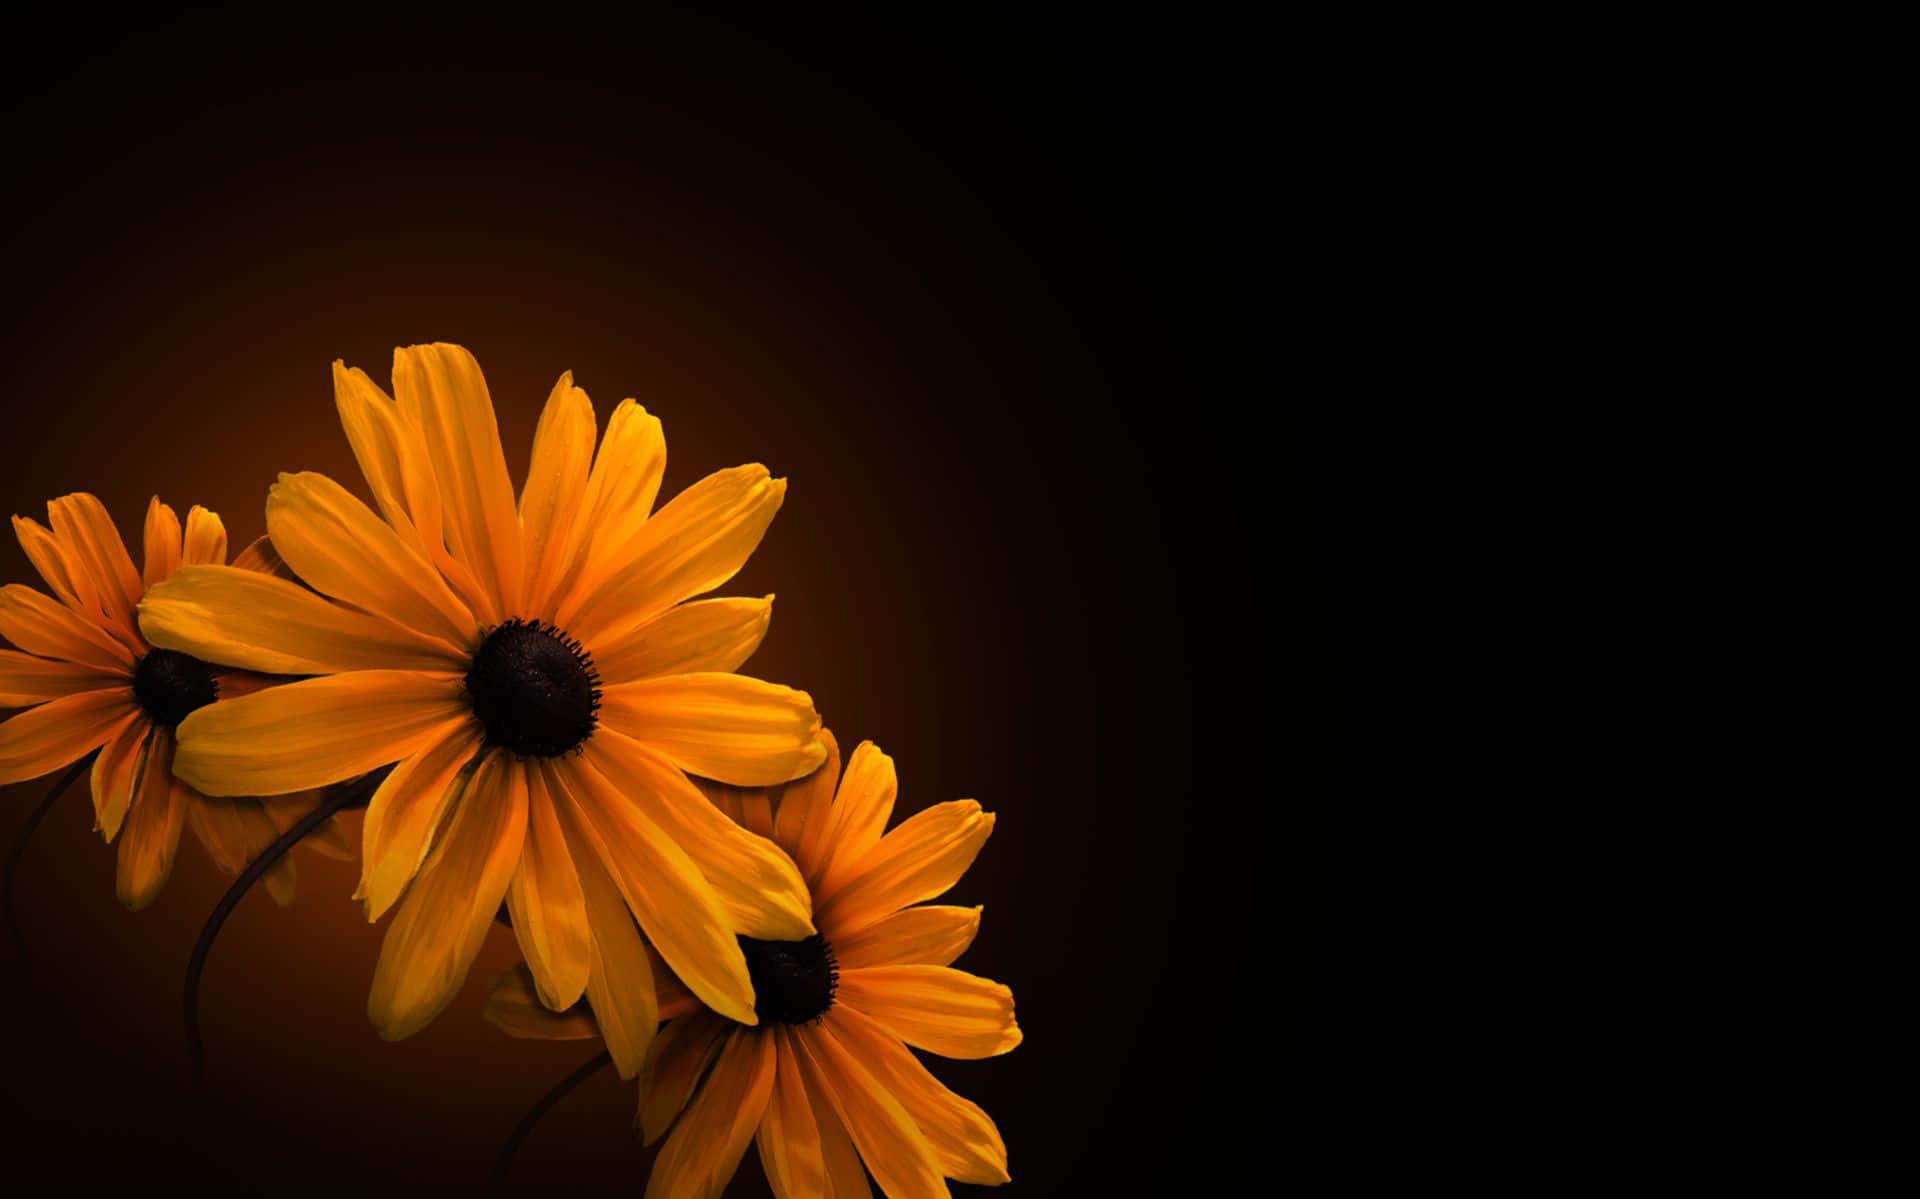 Download Yellow Flowers With Black Center Wallpaper